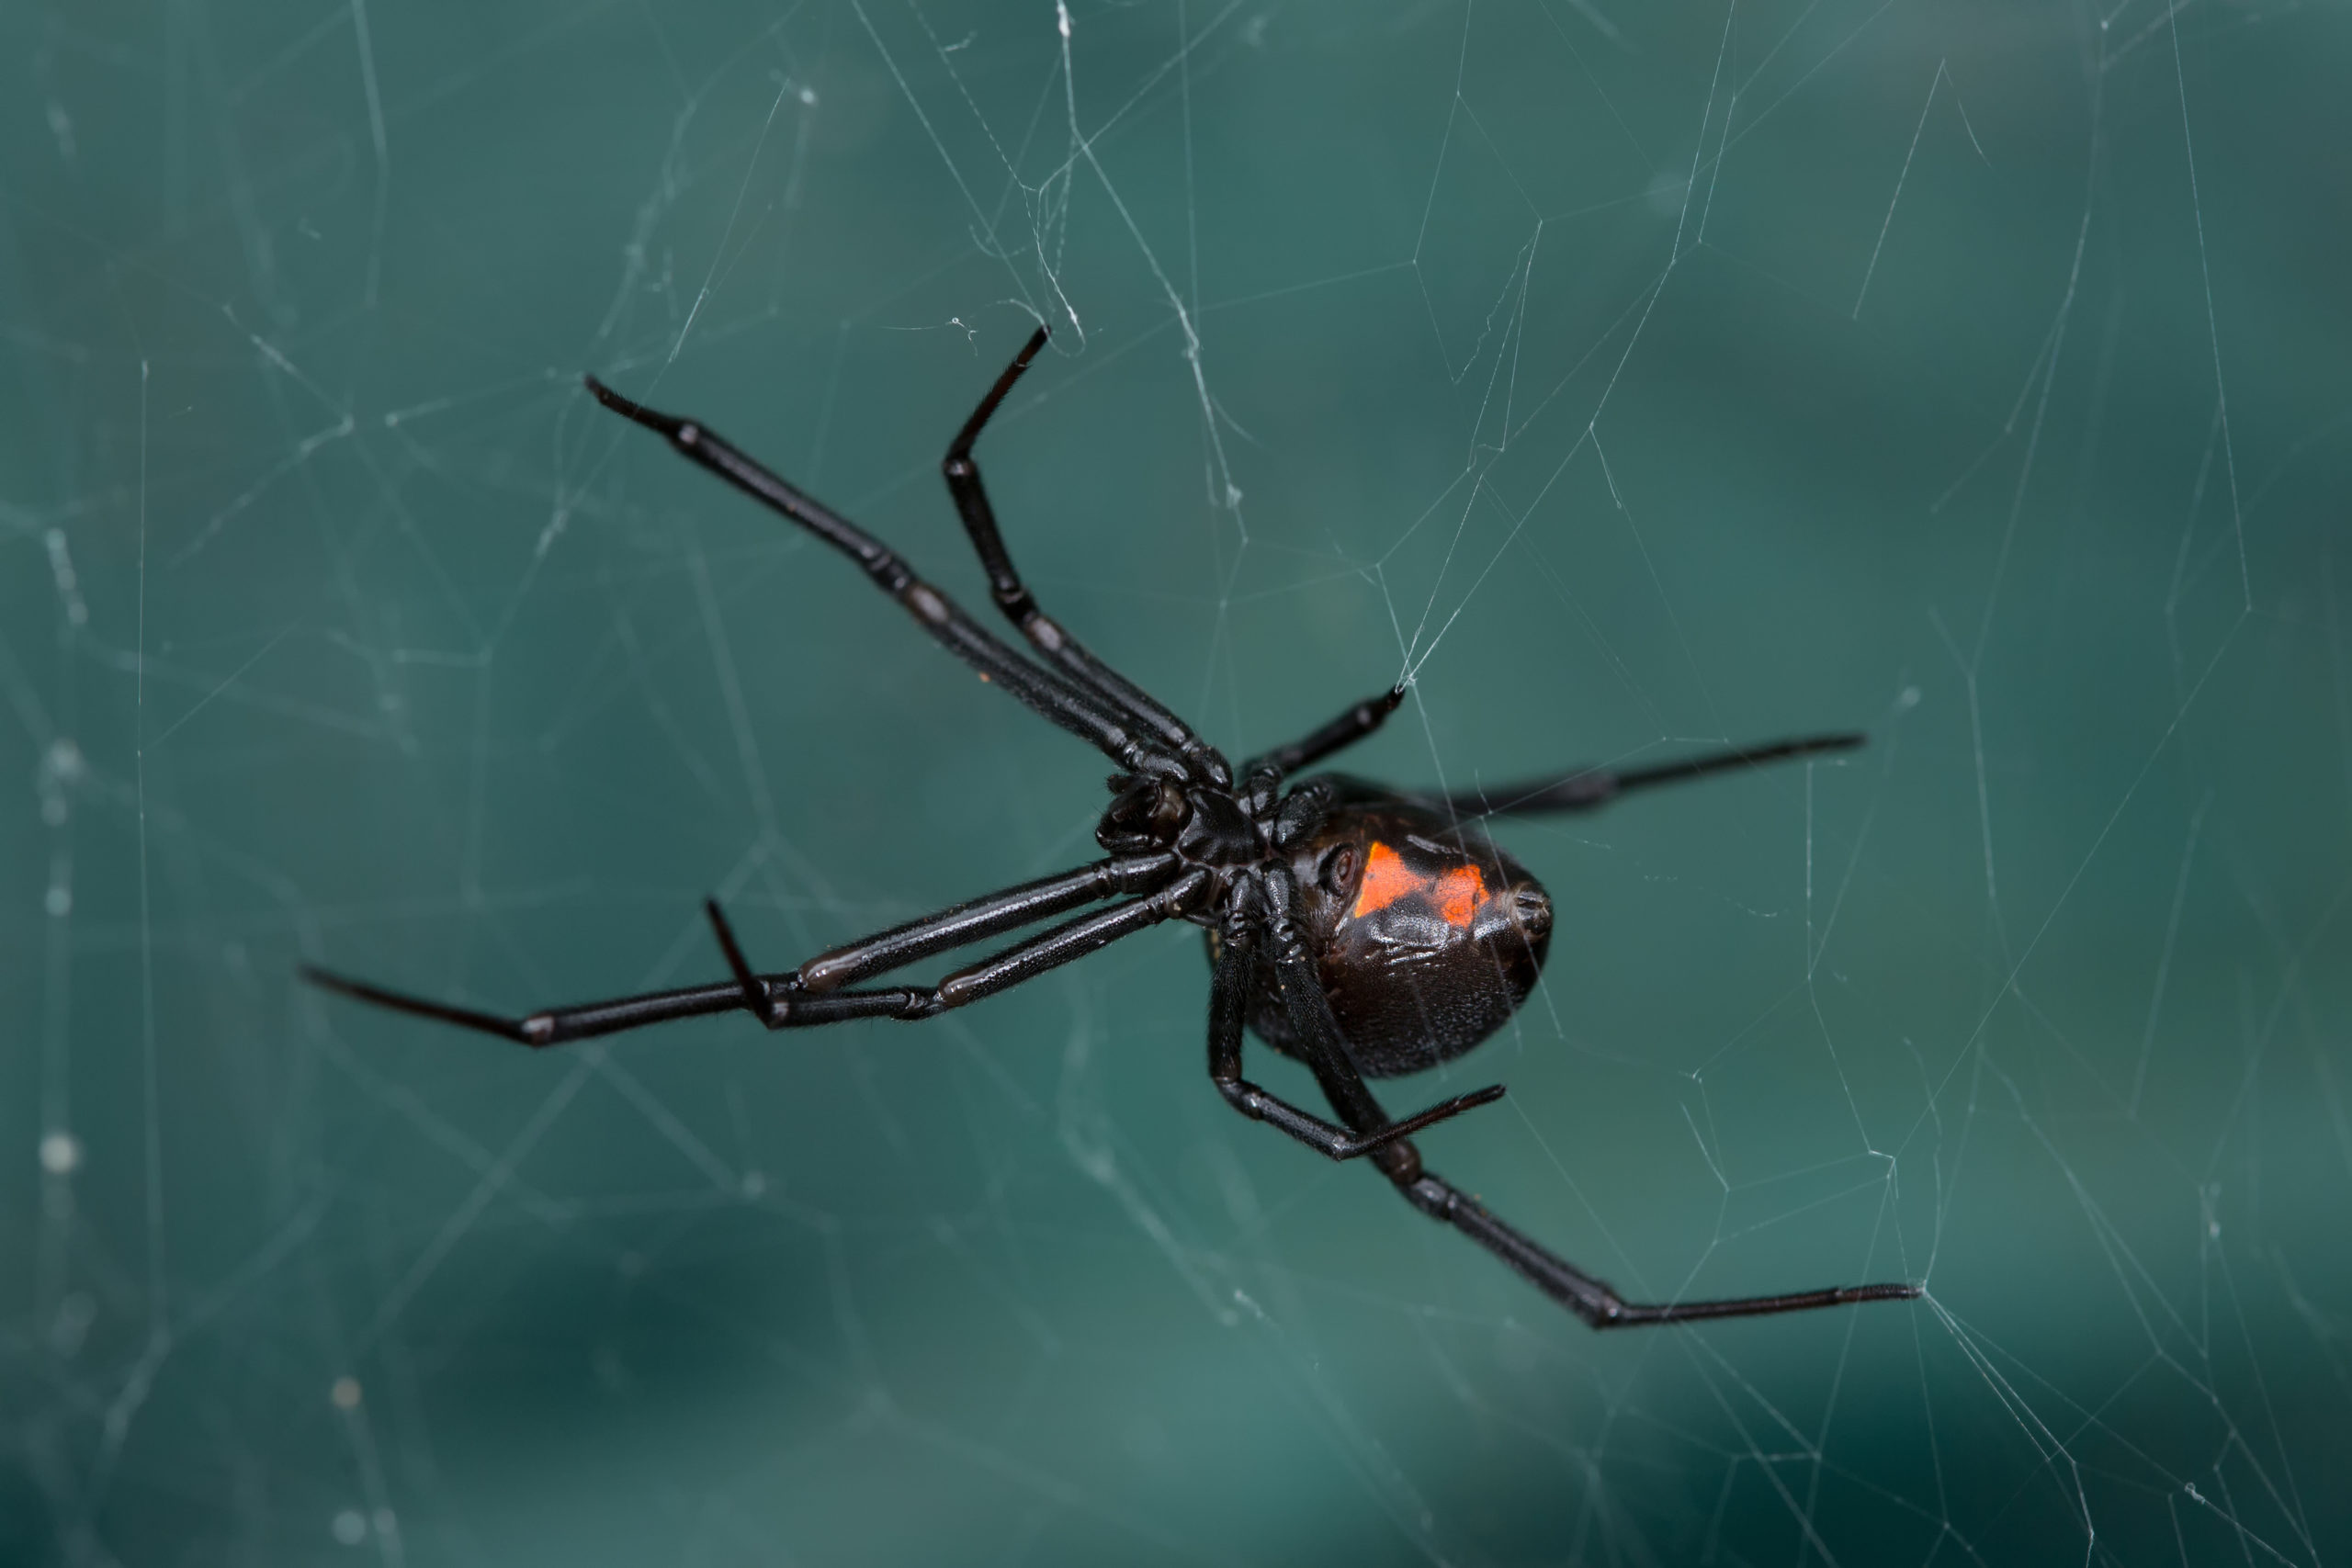 Black widow spiders: Facts about this infamous group of arachnids